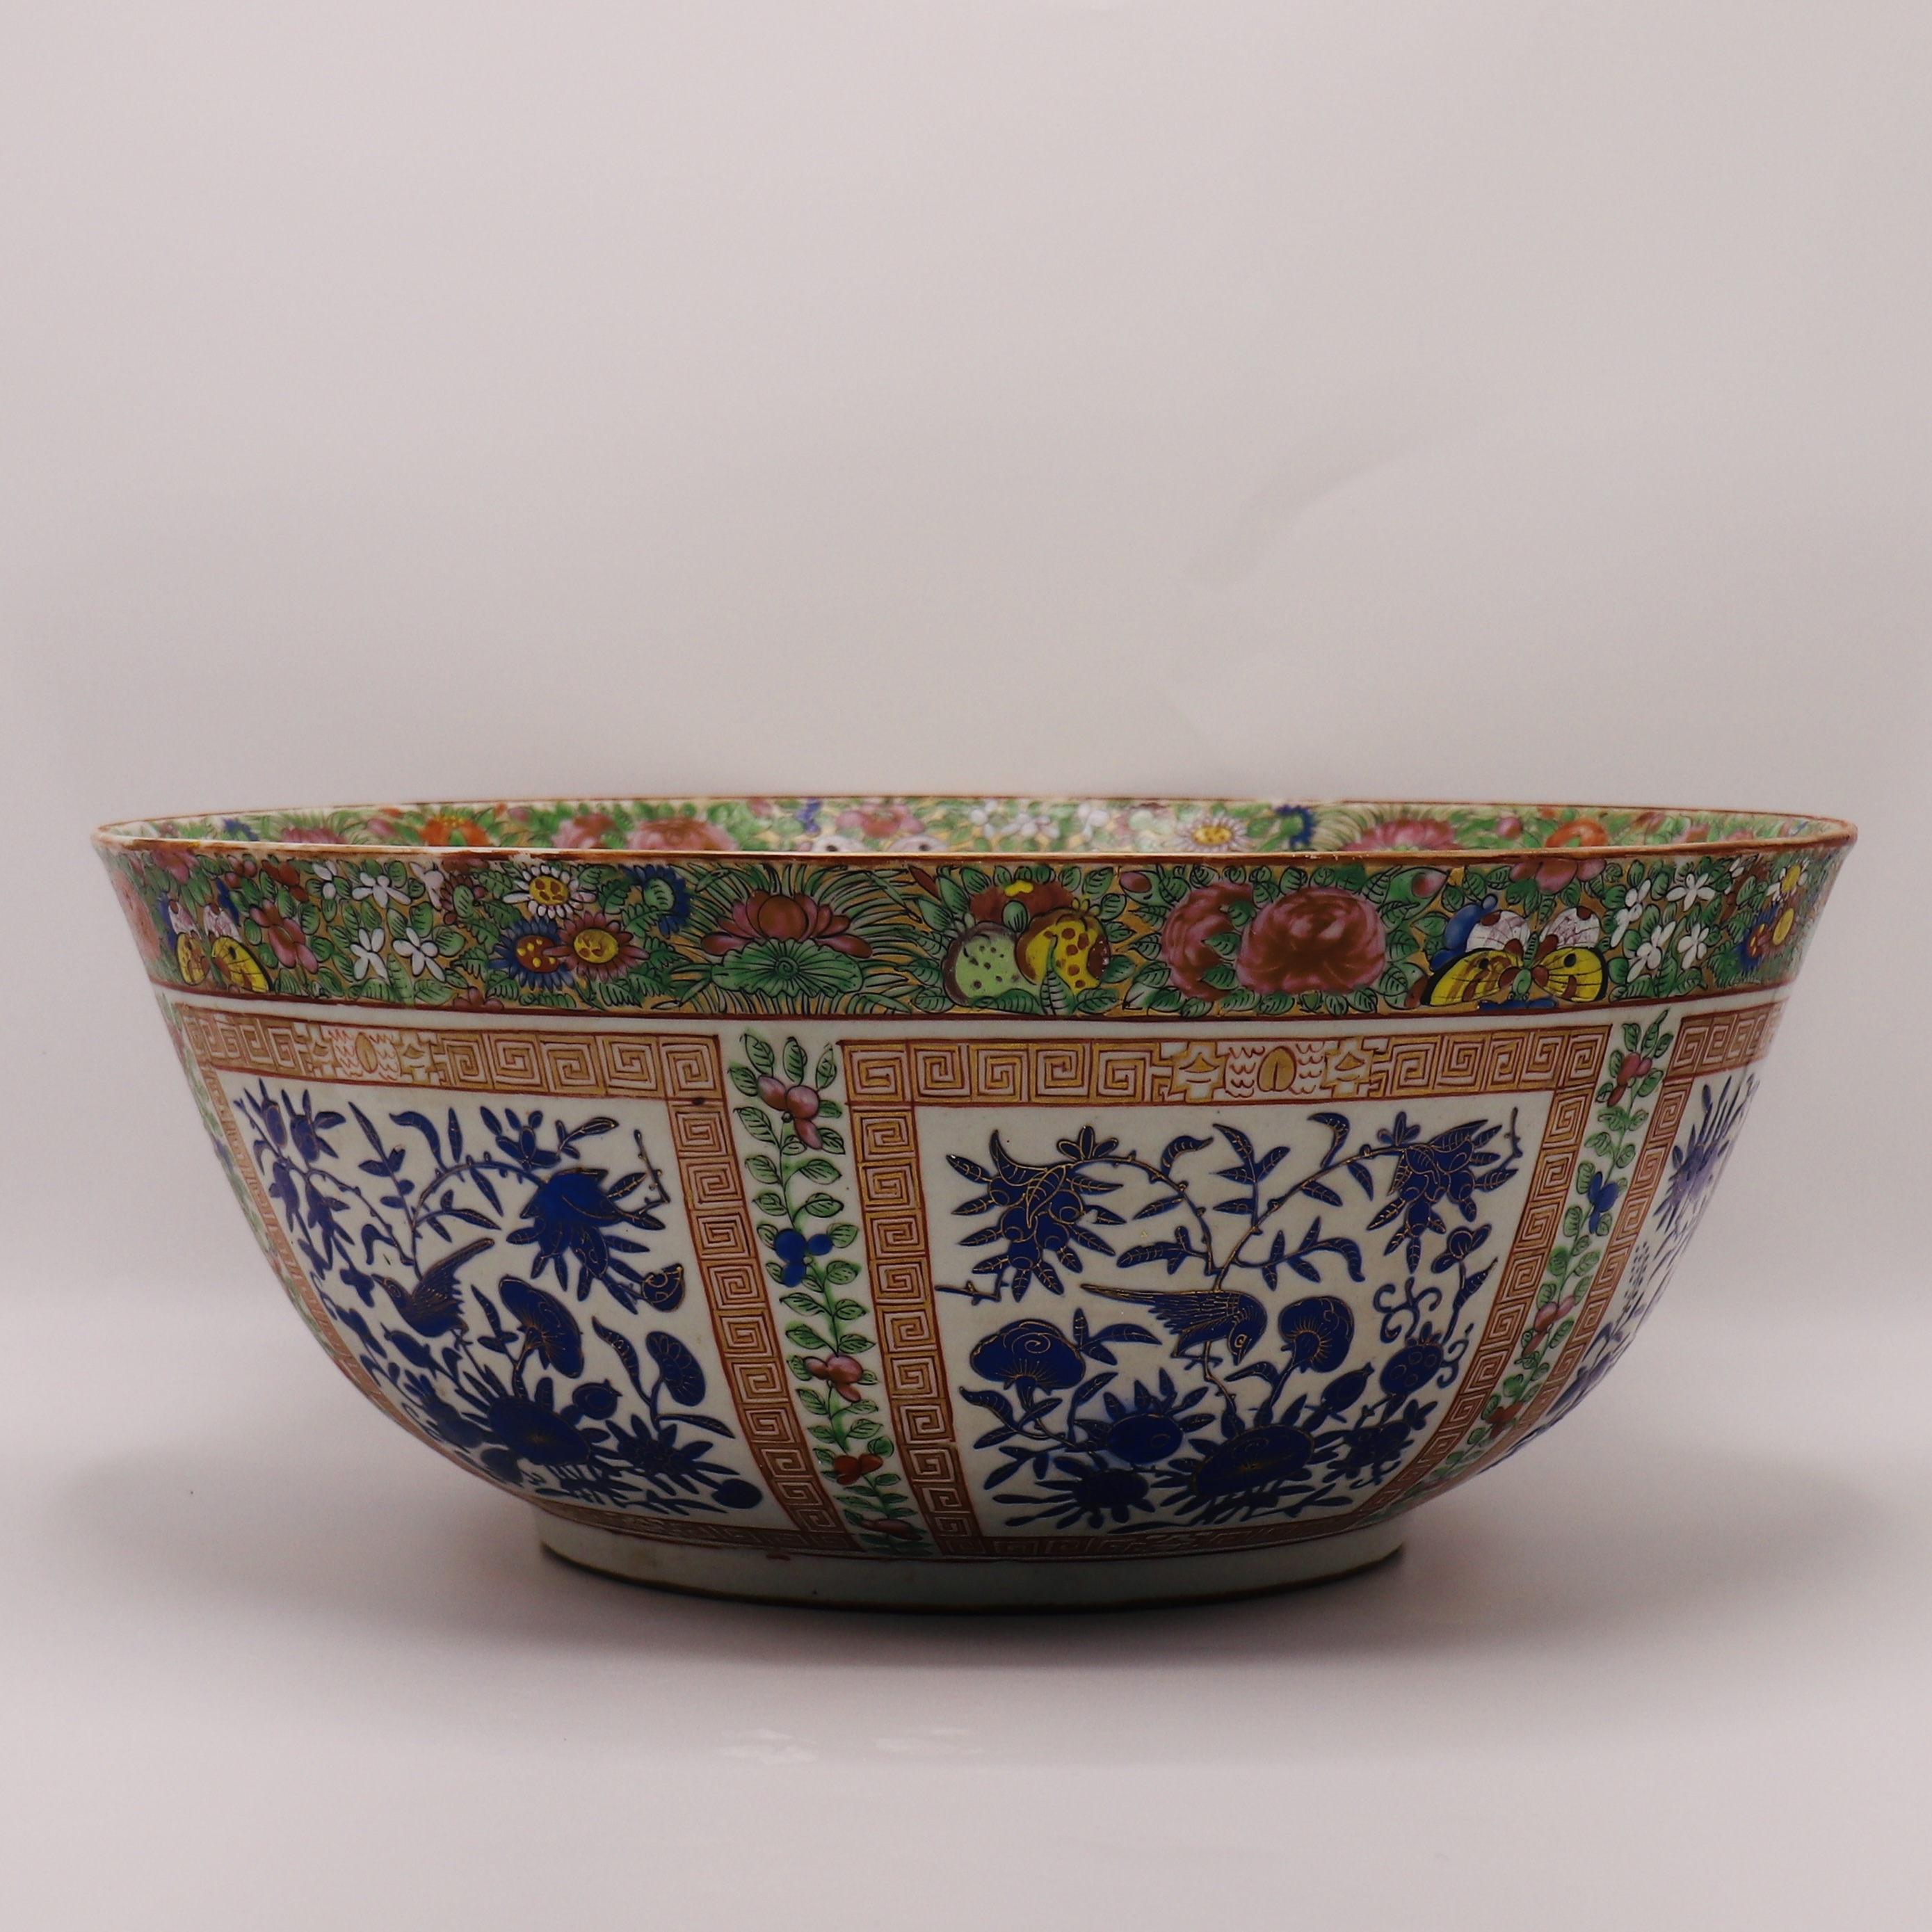 A LARGE CHINESE FAMILLE ROSE PUNCH BOWL WITH ISLAMIC INSCRIPTION, QING DYNASTY (1644-1911)